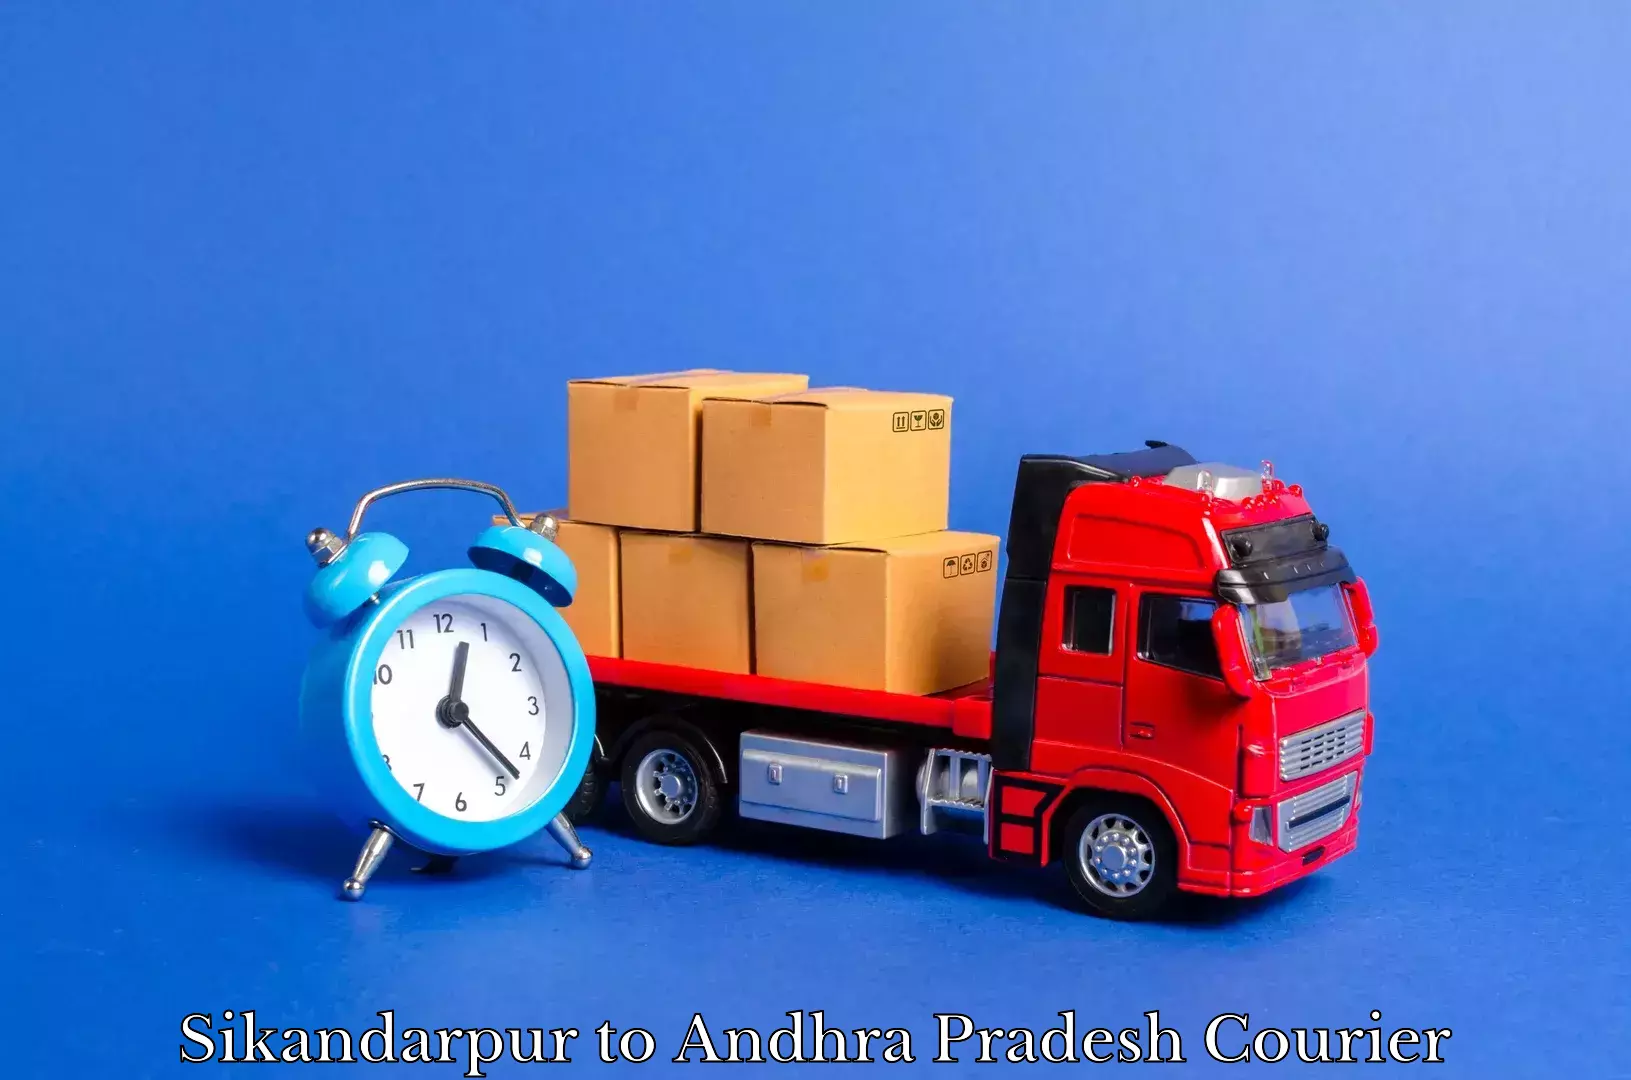 Full-service movers in Sikandarpur to Andhra Pradesh